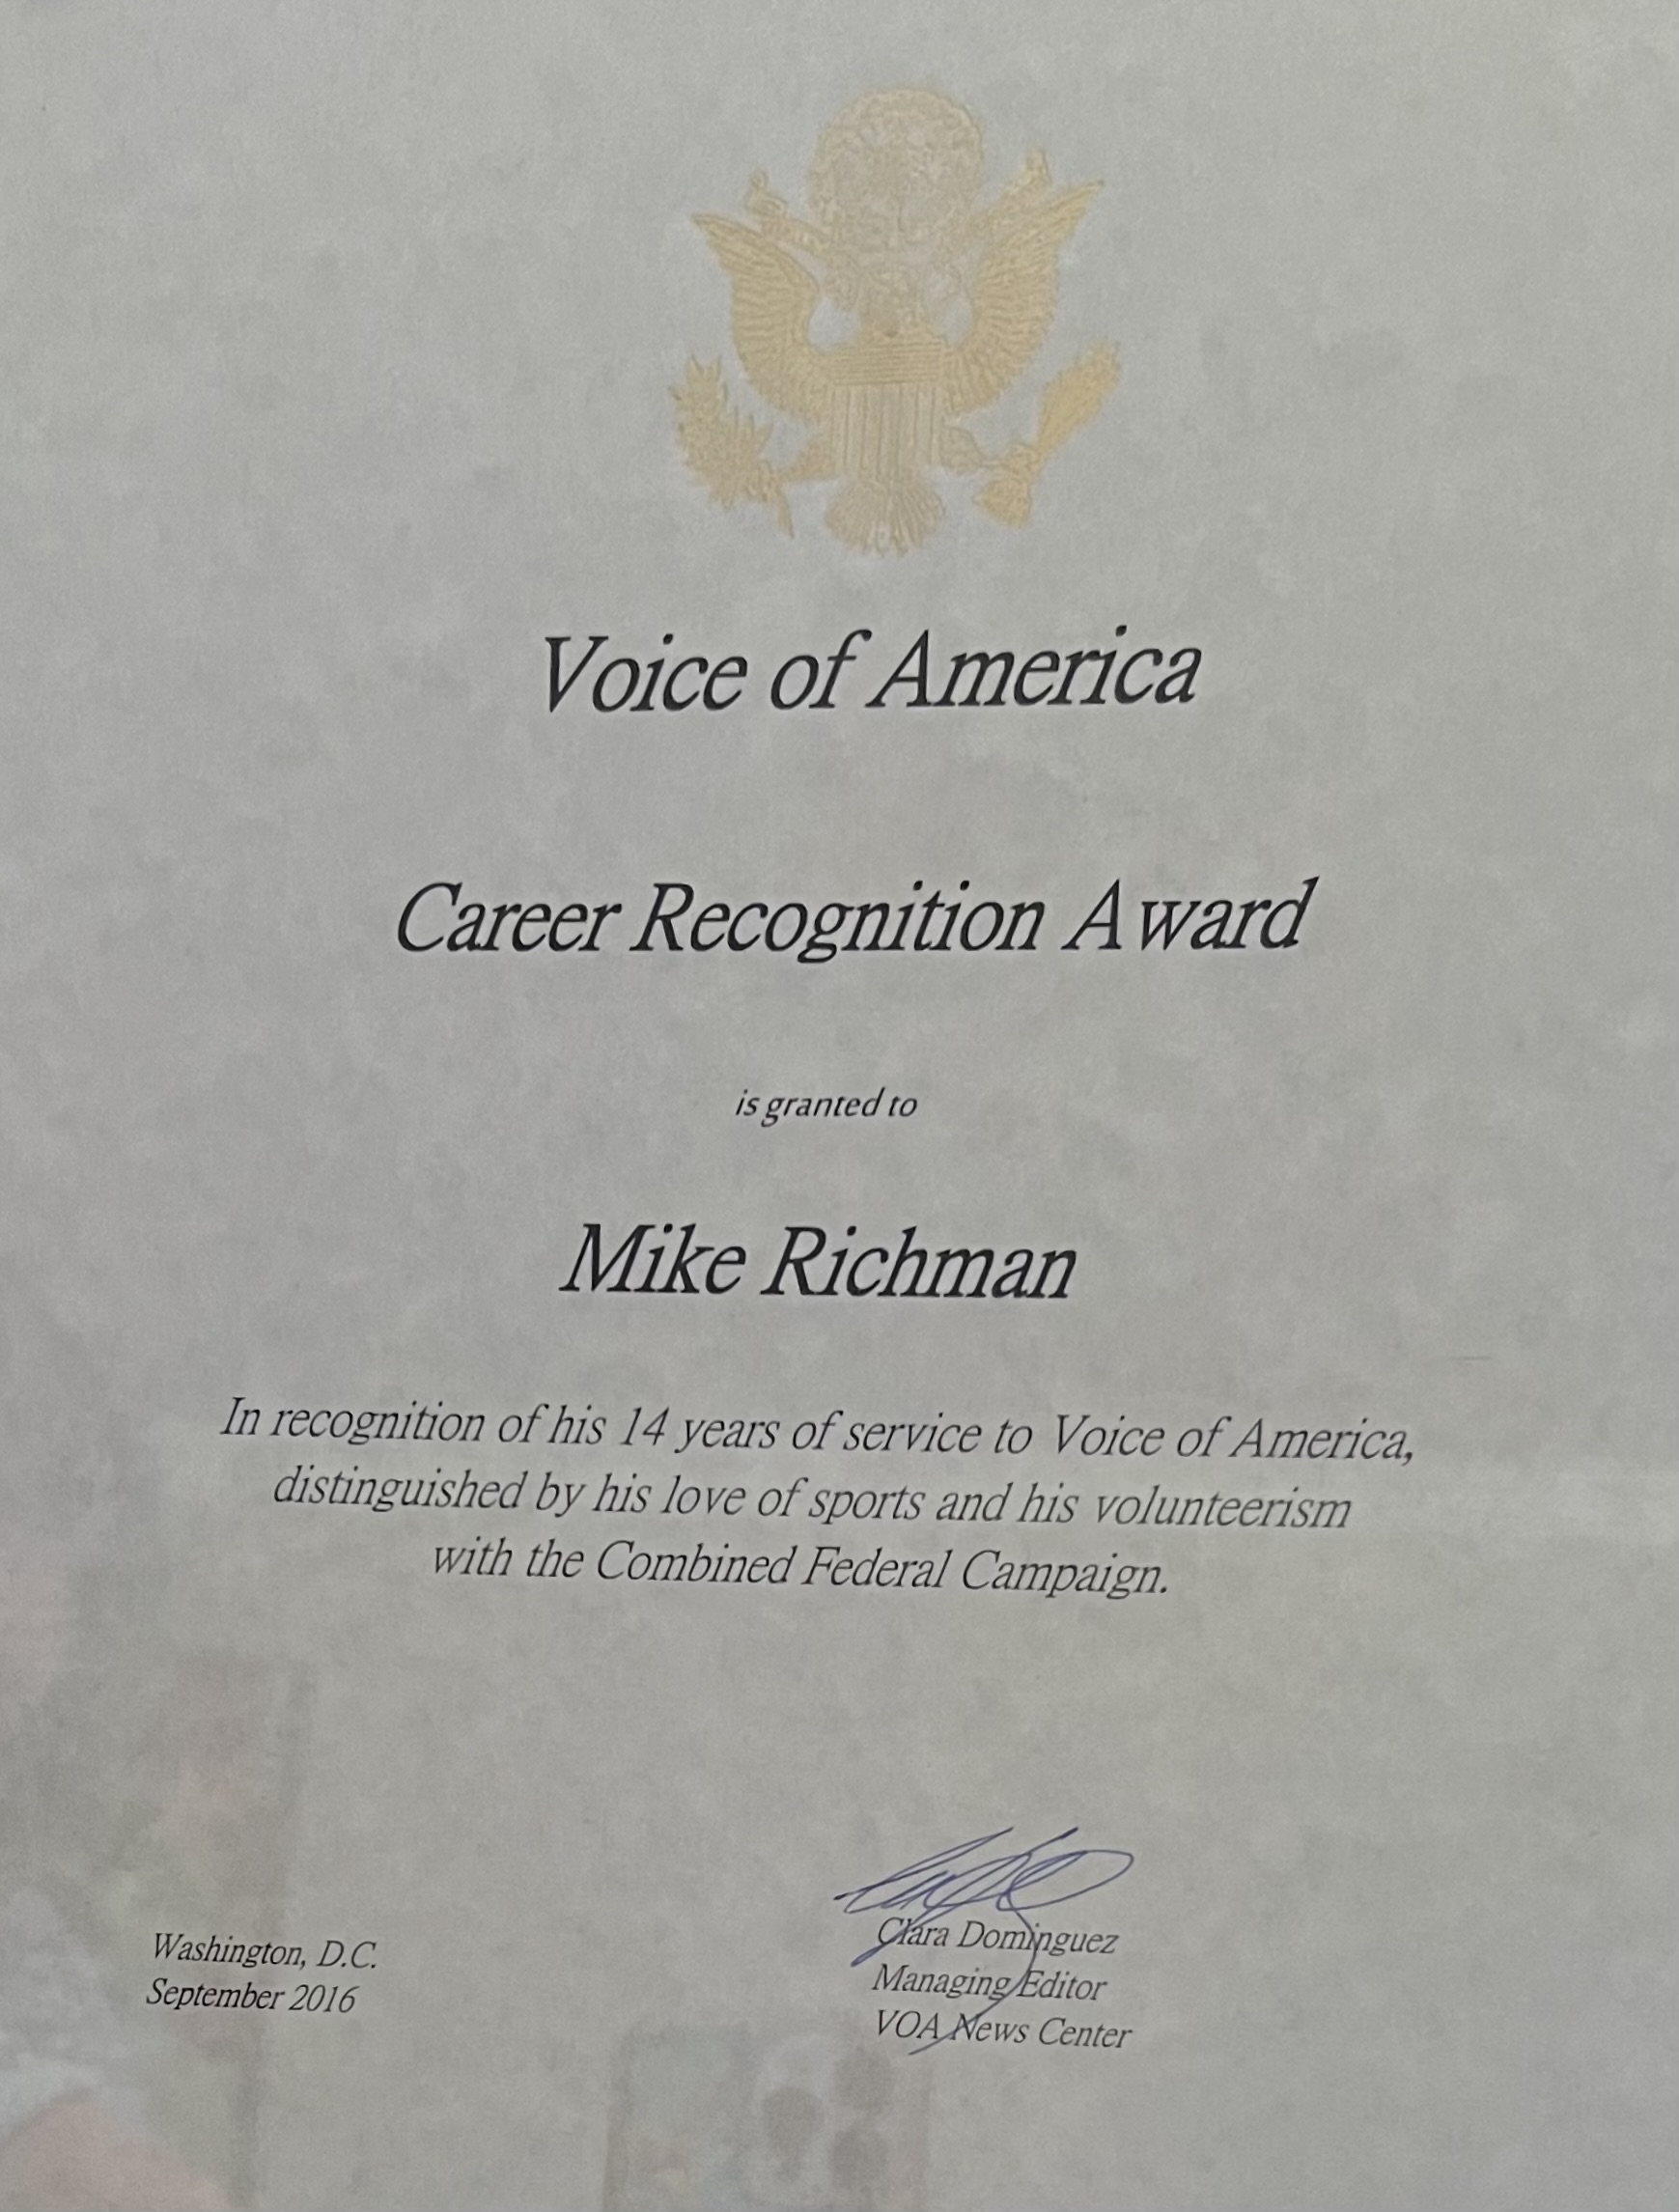 In 2016, the Voice of America honored Mike Richman with a Career Recognition Award.